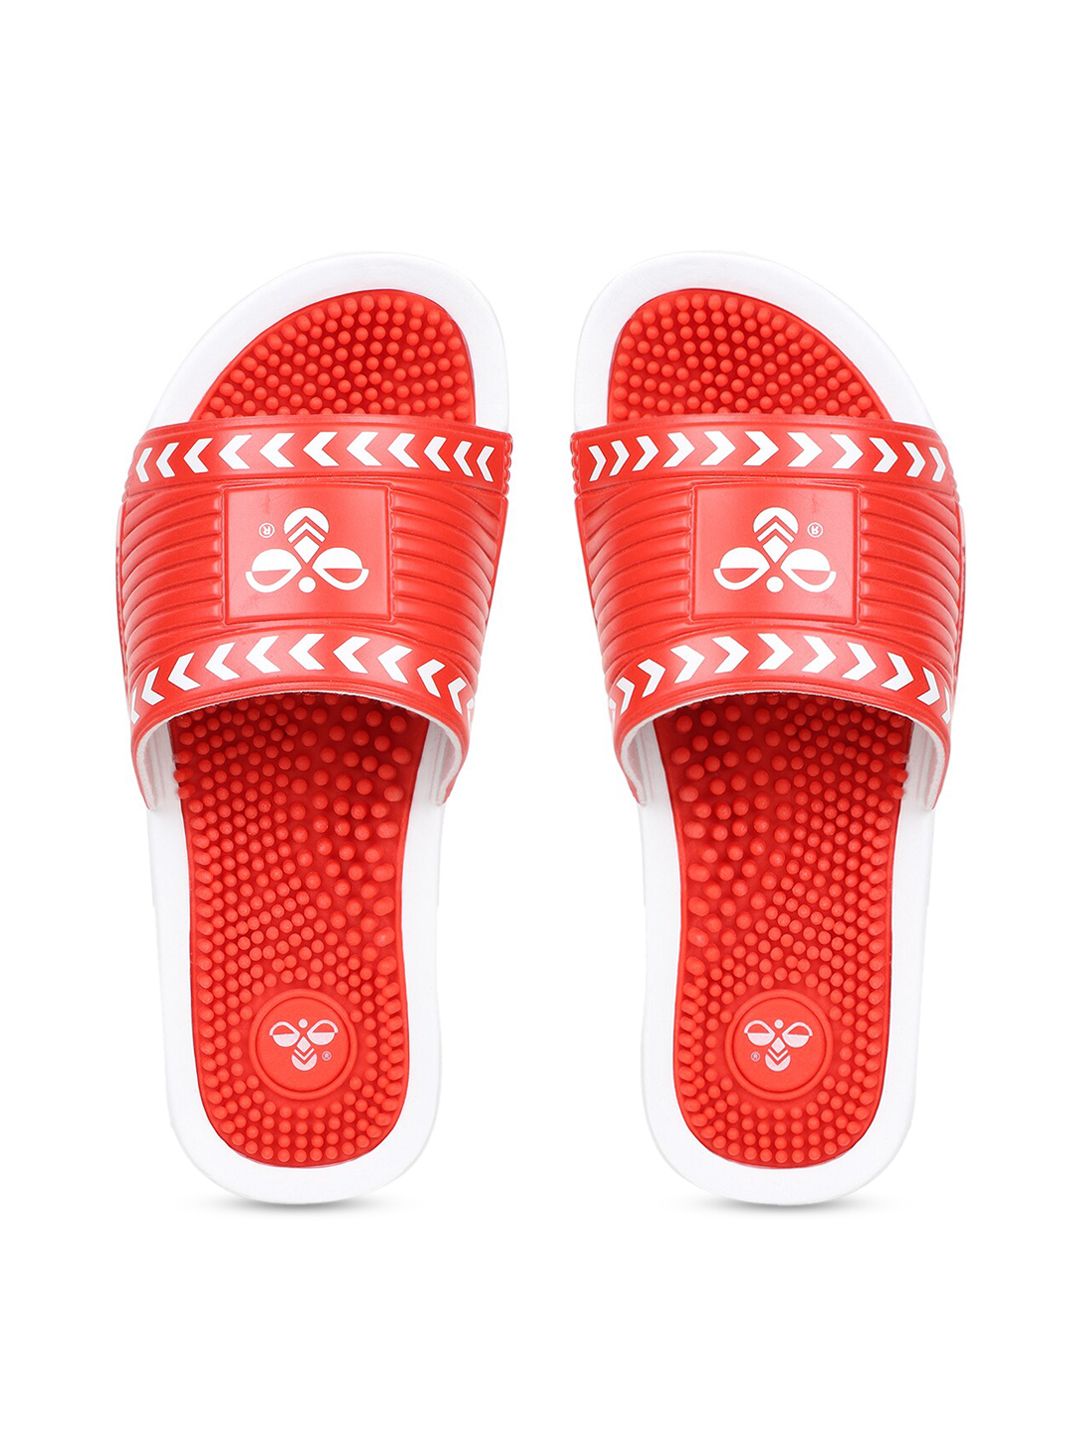 hummel Unisex Red & White Printed Sliders Price in India